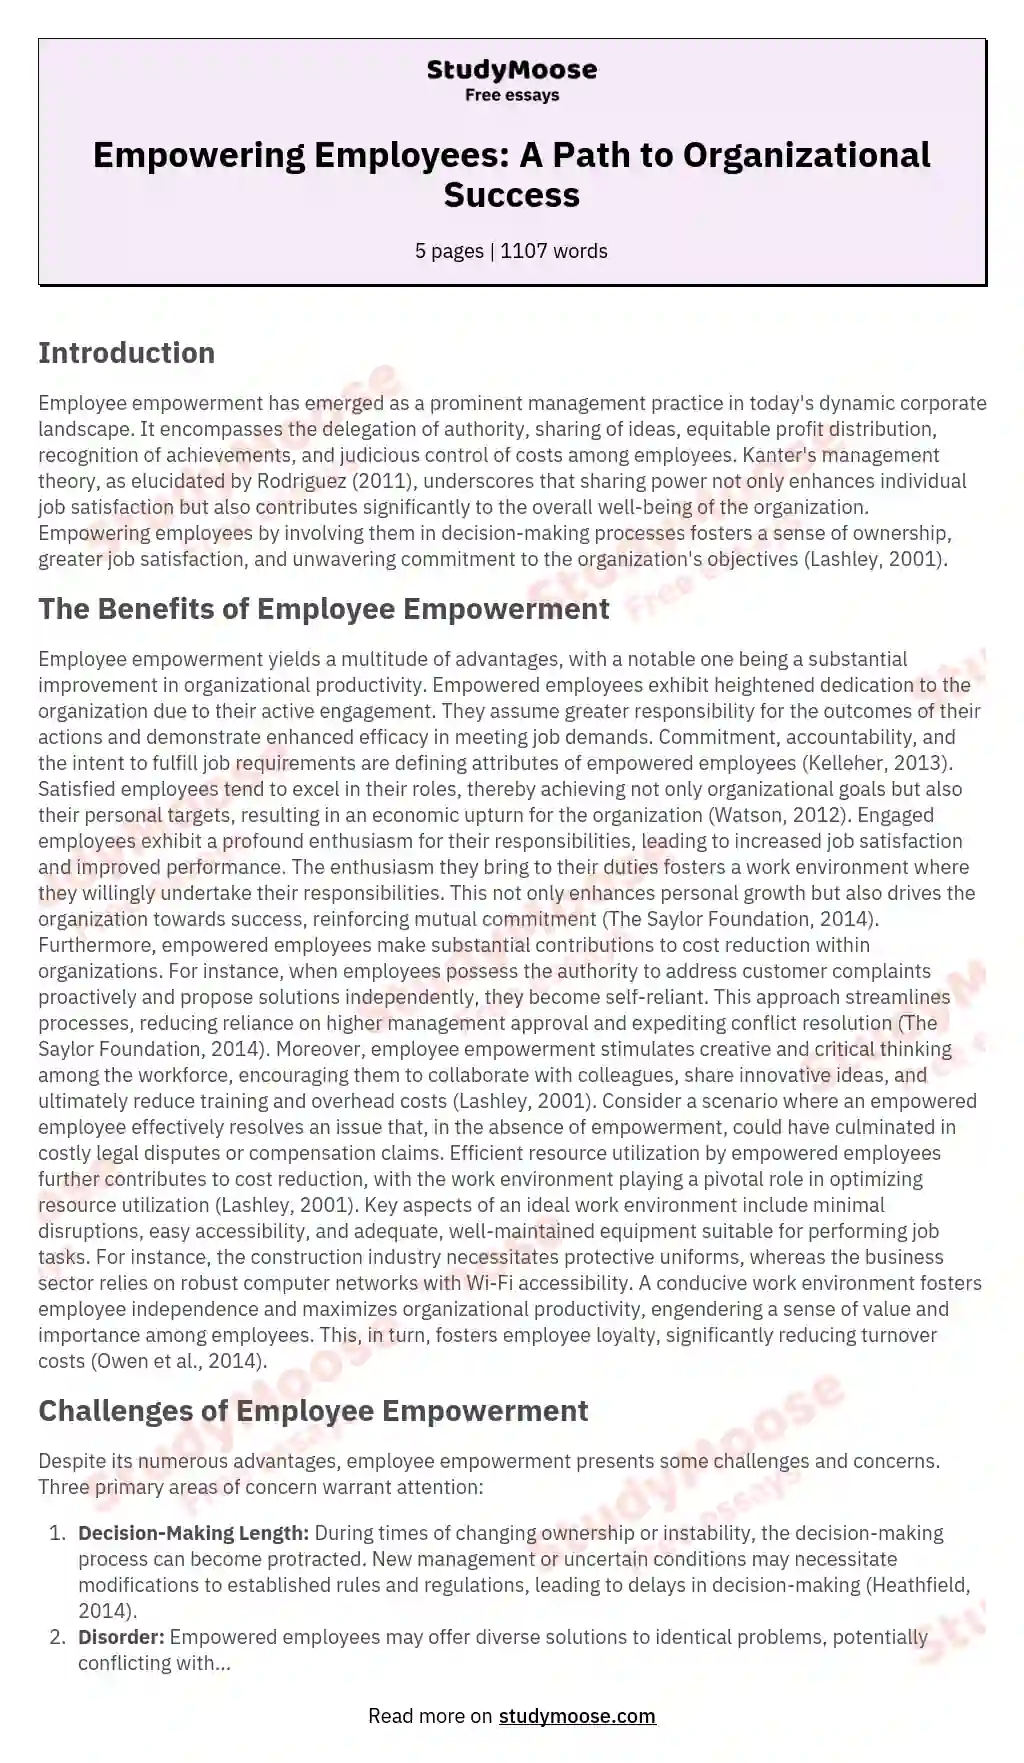 Empowering Employees: A Path to Organizational Success essay